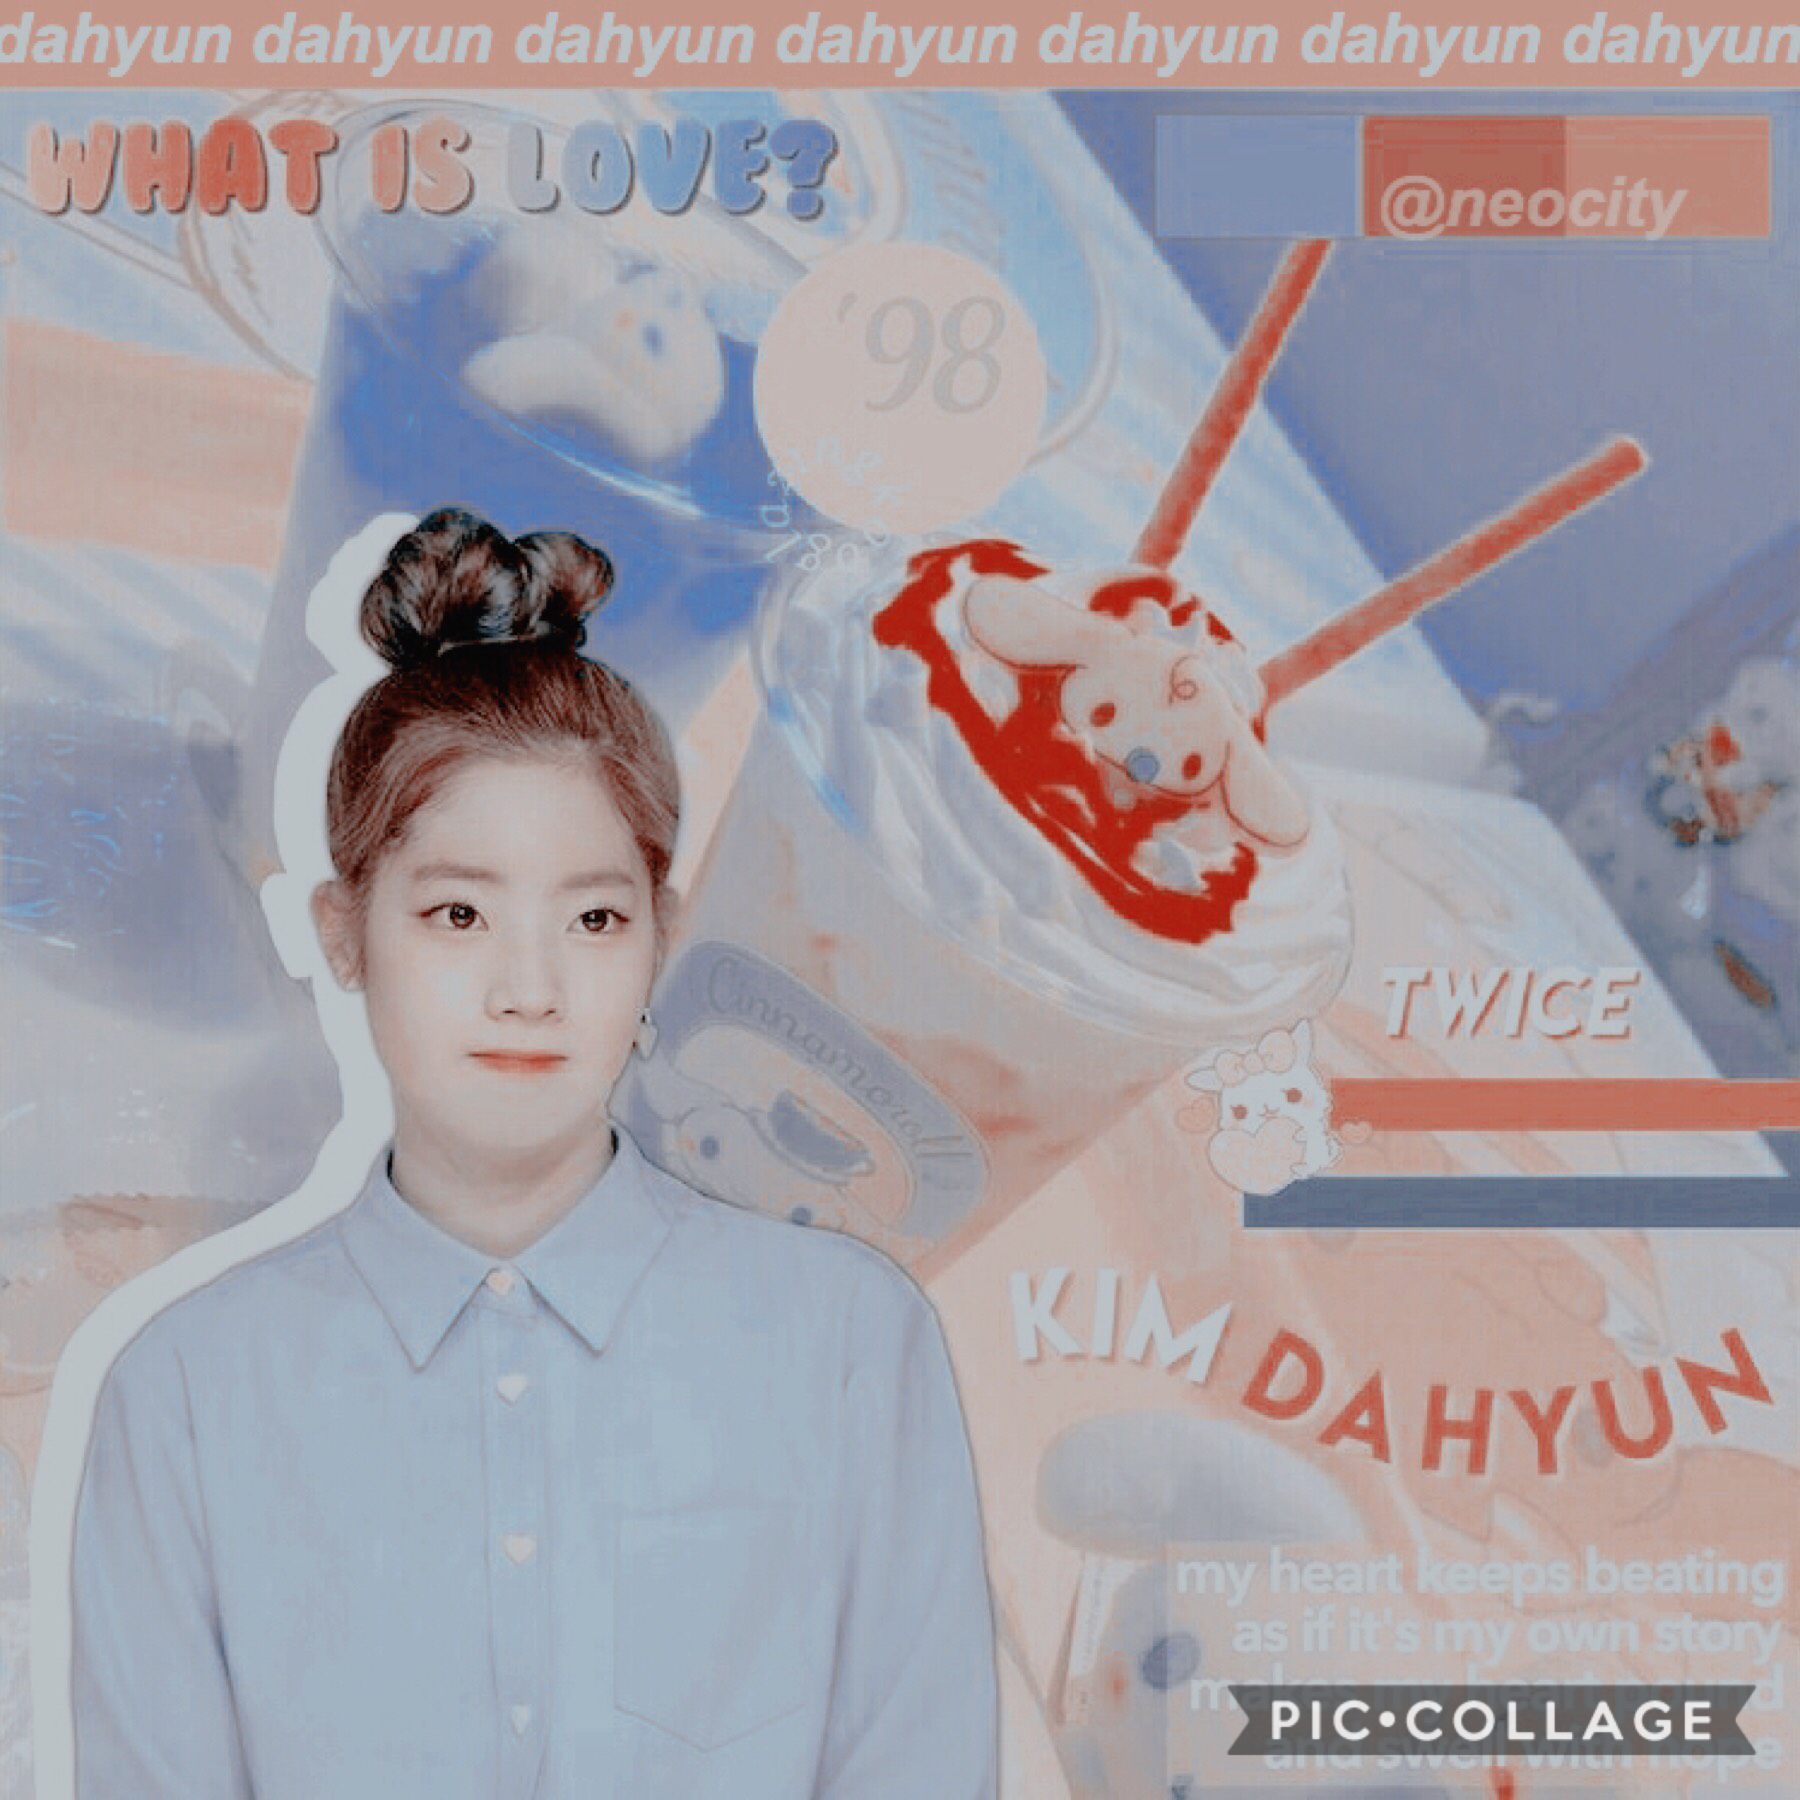 - 🍭 -
✨dahyun - twice✨
for @ex0tic-edits kpop games!

i decided to make a colorful edit (kind of).
hope u like it 😊😊